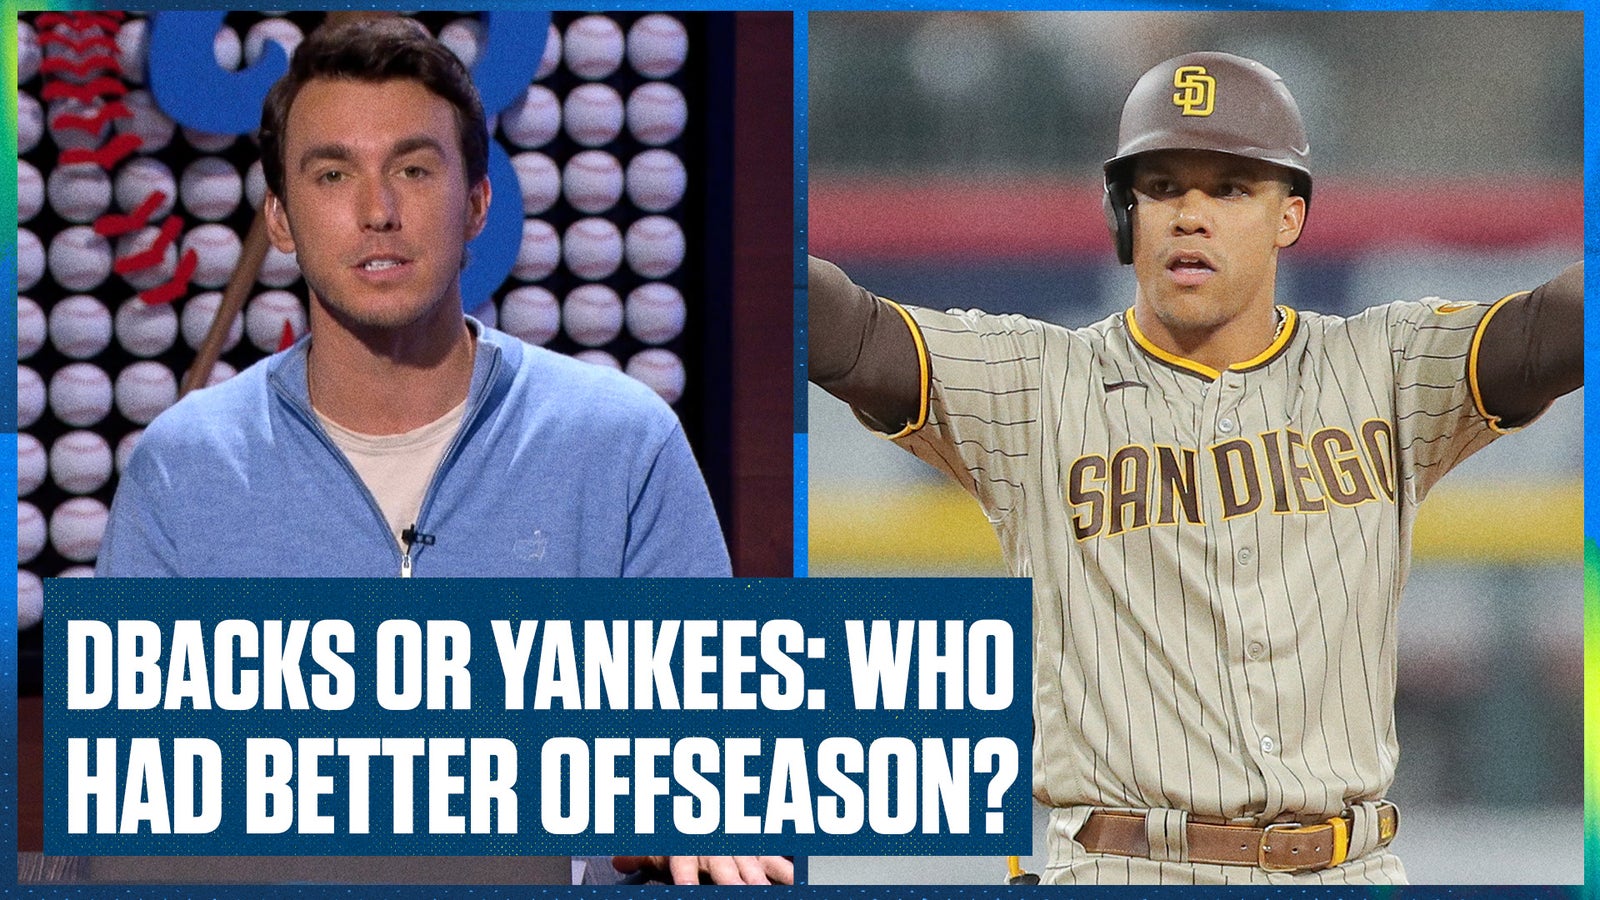 D-backs or Yankees: Who's had the best offseason beyond Dodgers?